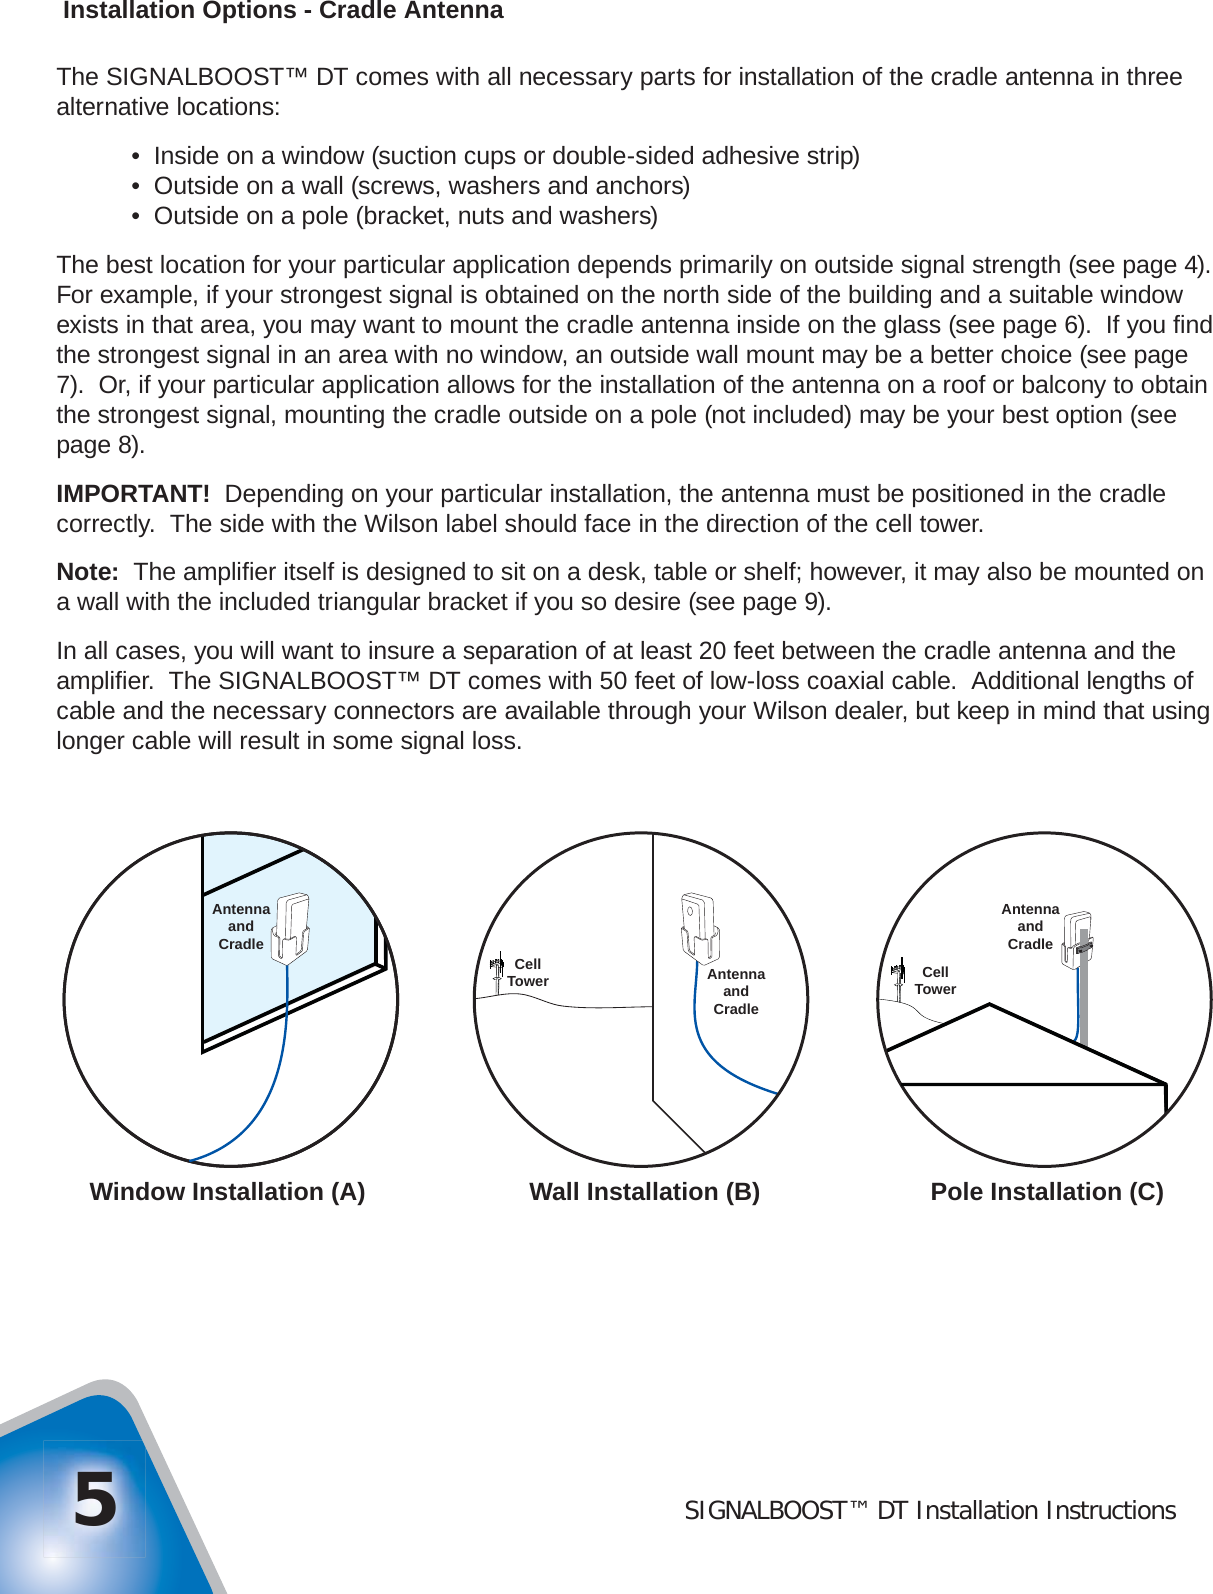 SIGNALBOOST™ DT Installation Instructions5 Installation Options - Cradle AntennaThe SIGNALBOOST™ DT comes with all necessary parts for installation of the cradle antenna in three alternative locations:  •  Inside on a window (suction cups or double-sided adhesive strip)  •  Outside on a wall (screws, washers and anchors)  •  Outside on a pole (bracket, nuts and washers)The best location for your particular application depends primarily on outside signal strength (see page 4).  For example, if your strongest signal is obtained on the north side of the building and a suitable window exists in that area, you may want to mount the cradle antenna inside on the glass (see page 6).  If you ﬁ nd the strongest signal in an area with no window, an outside wall mount may be a better choice (see page 7).  Or, if your particular application allows for the installation of the antenna on a roof or balcony to obtain the strongest signal, mounting the cradle outside on a pole (not included) may be your best option (see page 8).IMPORTANT!  Depending on your particular installation, the antenna must be positioned in the cradle correctly.  The side with the Wilson label should face in the direction of the cell tower.Note:  The ampliﬁ er itself is designed to sit on a desk, table or shelf; however, it may also be mounted on a wall with the included triangular bracket if you so desire (see page 9).In all cases, you will want to insure a separation of at least 20 feet between the cradle antenna and the ampliﬁ er.  The SIGNALBOOST™ DT comes with 50 feet of low-loss coaxial cable.  Additional lengths of cable and the necessary connectors are available through your Wilson dealer, but keep in mind that using longer cable will result in some signal loss.Window Installation (A) Wall Installation (B) Pole Installation (C)AntennaandCradleCellTowerAntennaandCradleAntennaandCradleCellTower